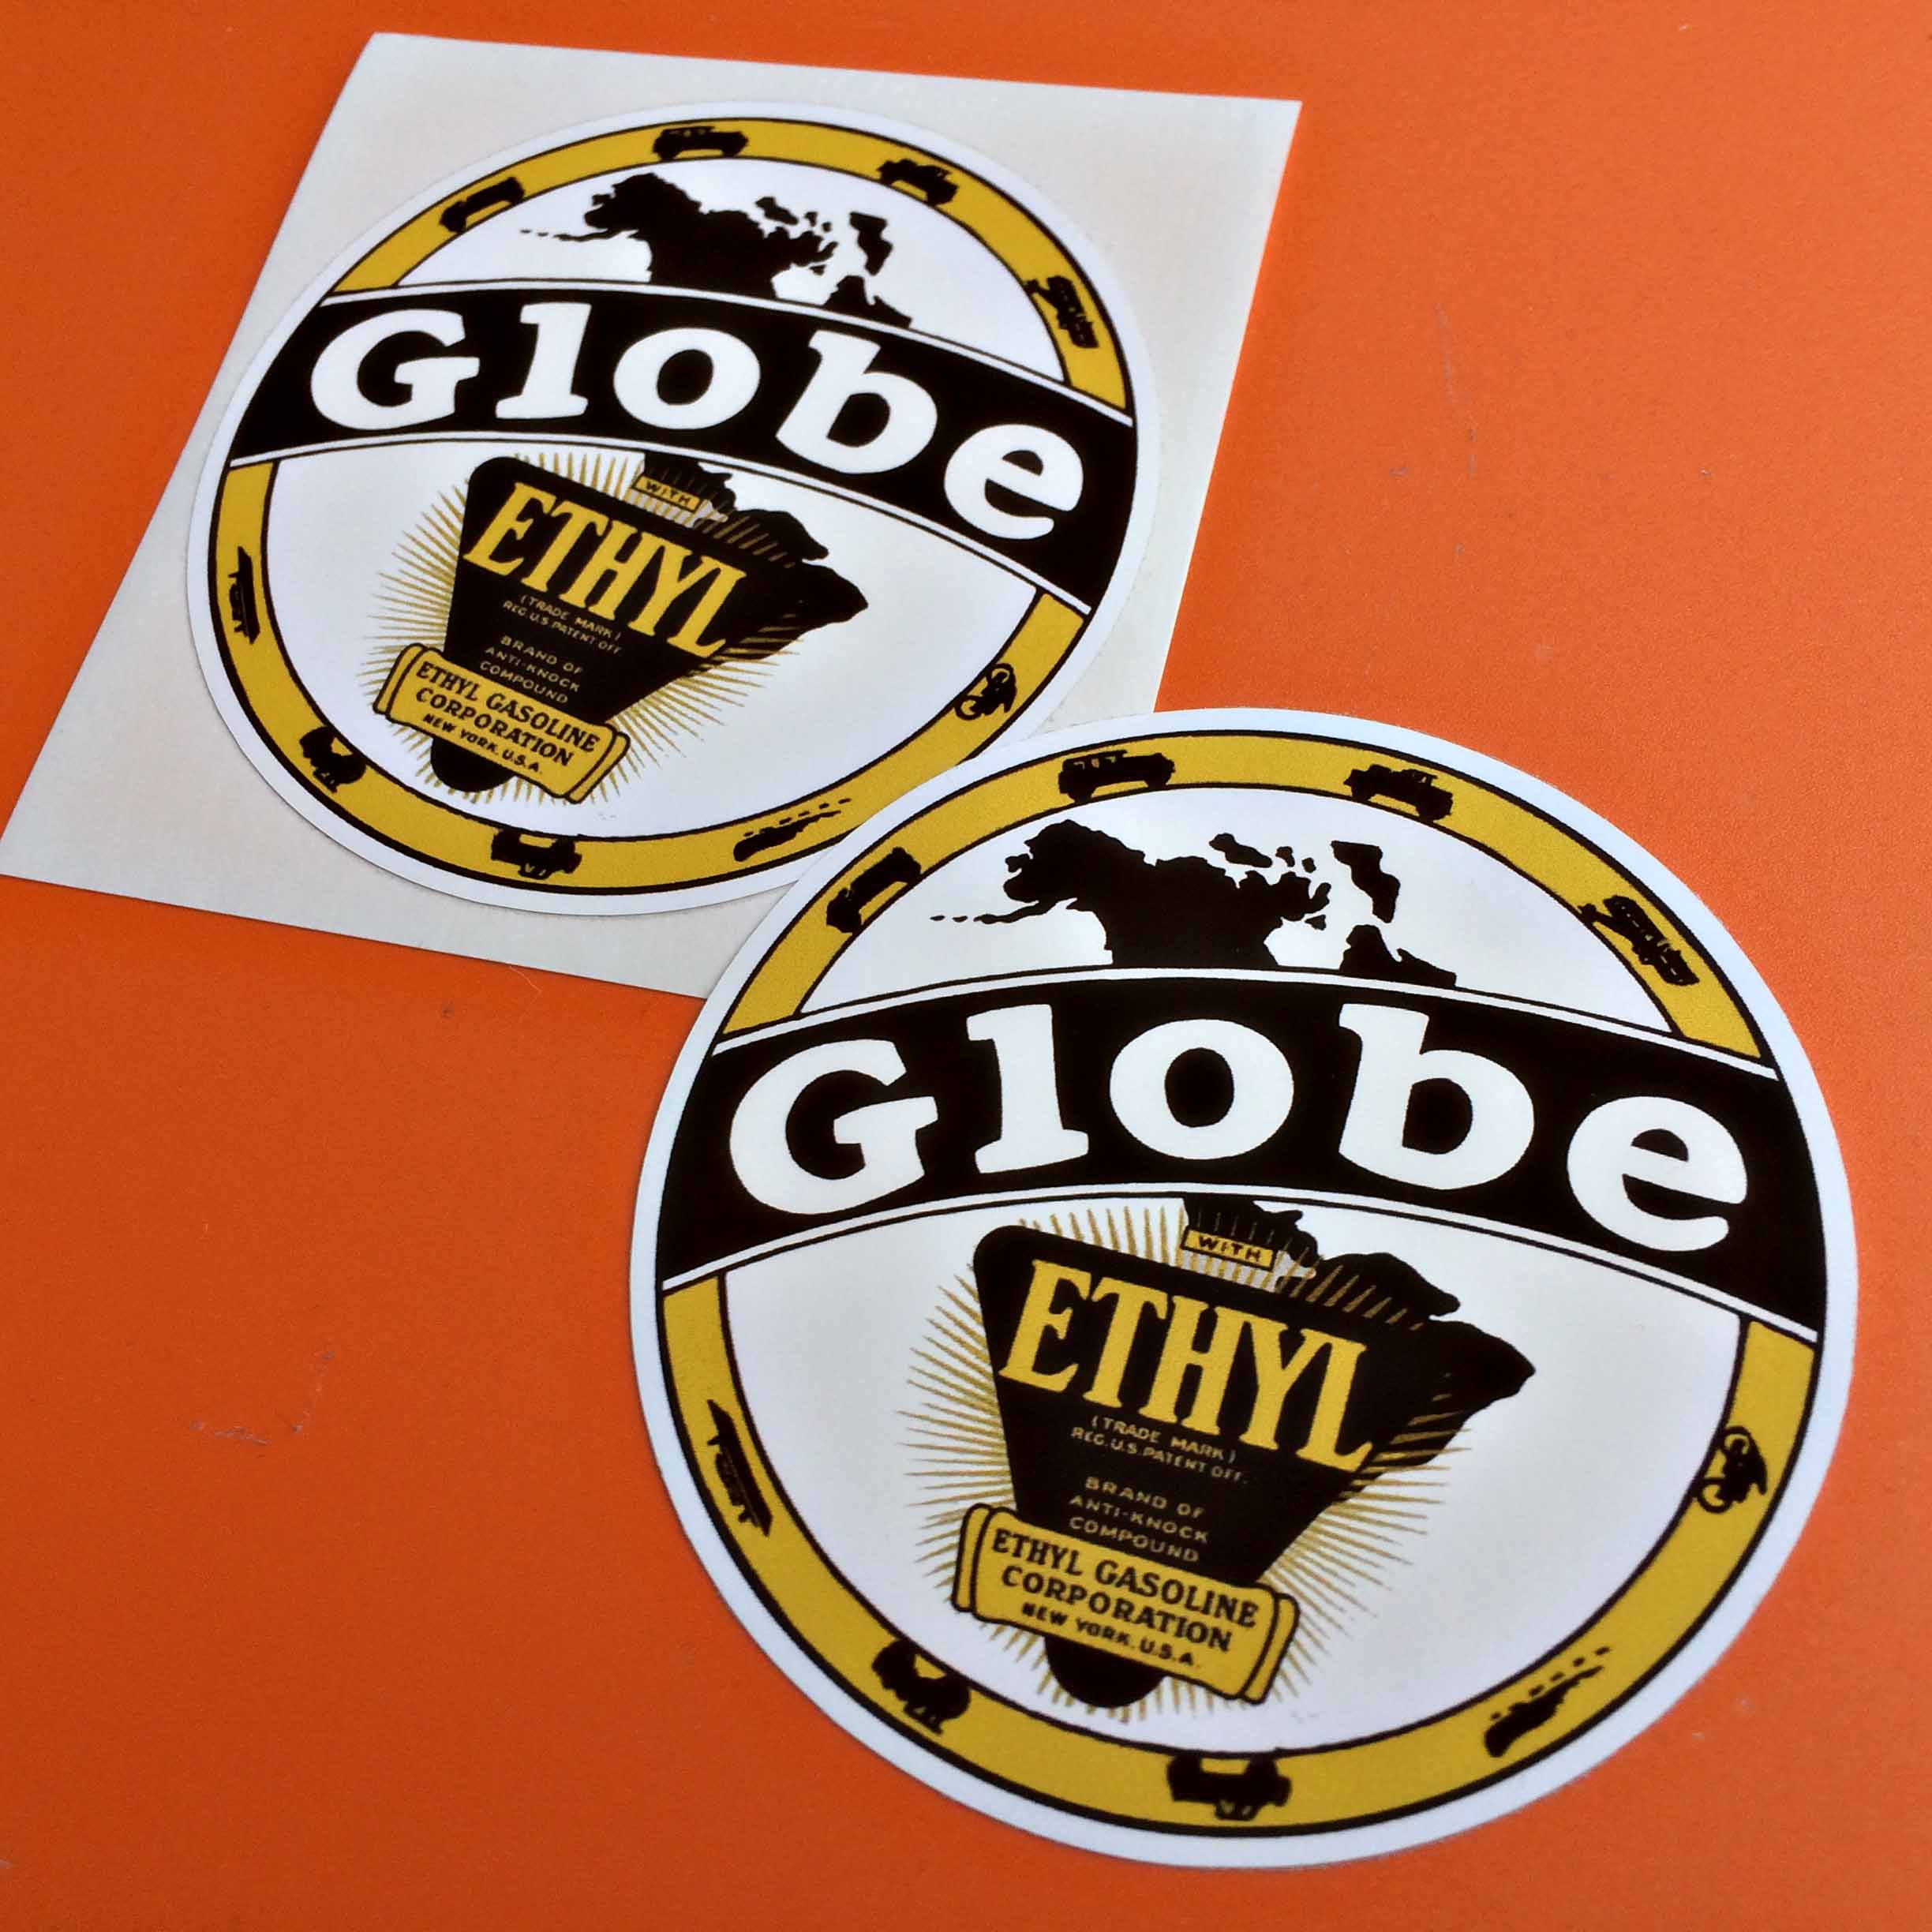 Globe in white lettering on a black banner sits across tow concentric circles in yellow and white. In the centre is a map of the world and the Ethyl logo, a black inverted triangle with yellow lettering. Types of vehicles surround the outer circle.